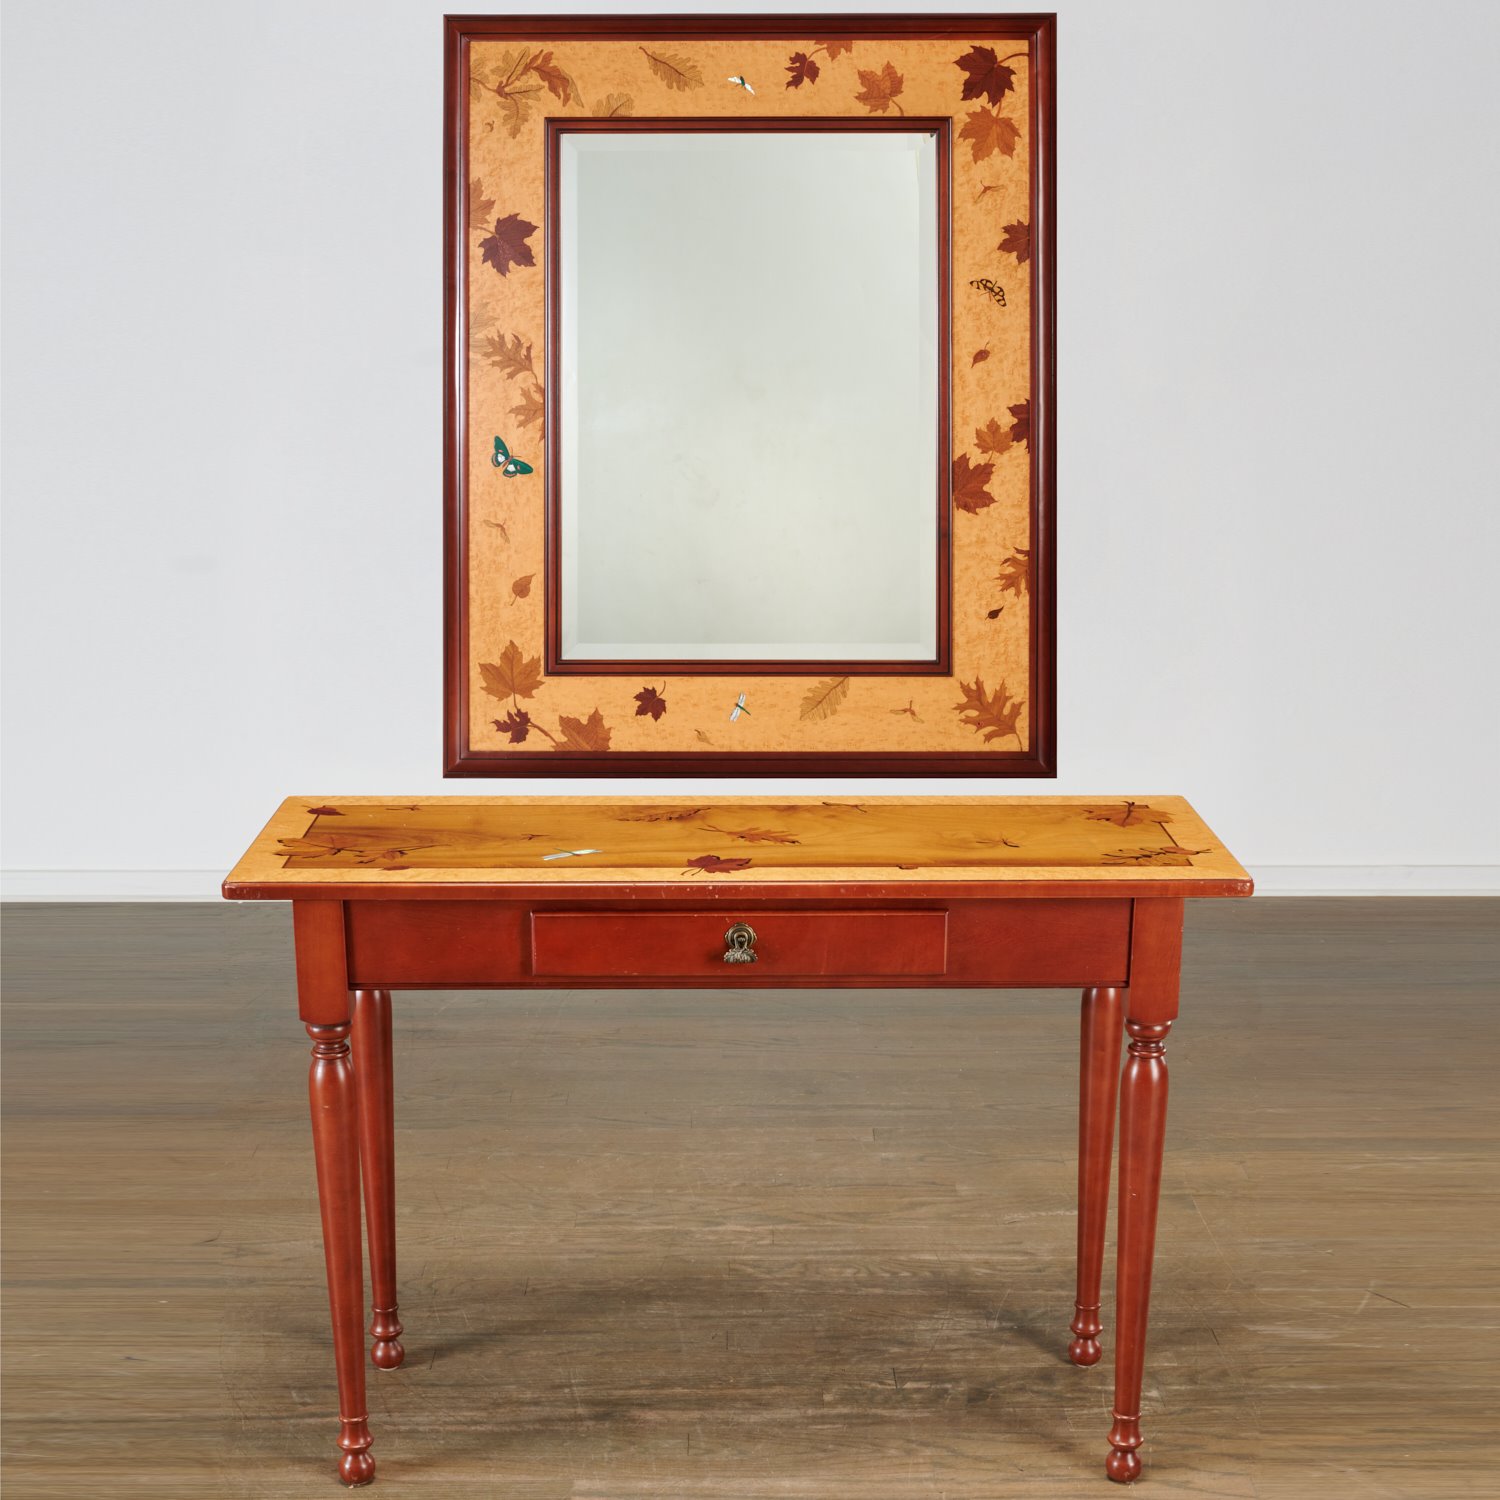 EMILE GALLE STYLE WOOD INLAID CONSOLE MIRROR 361d0e